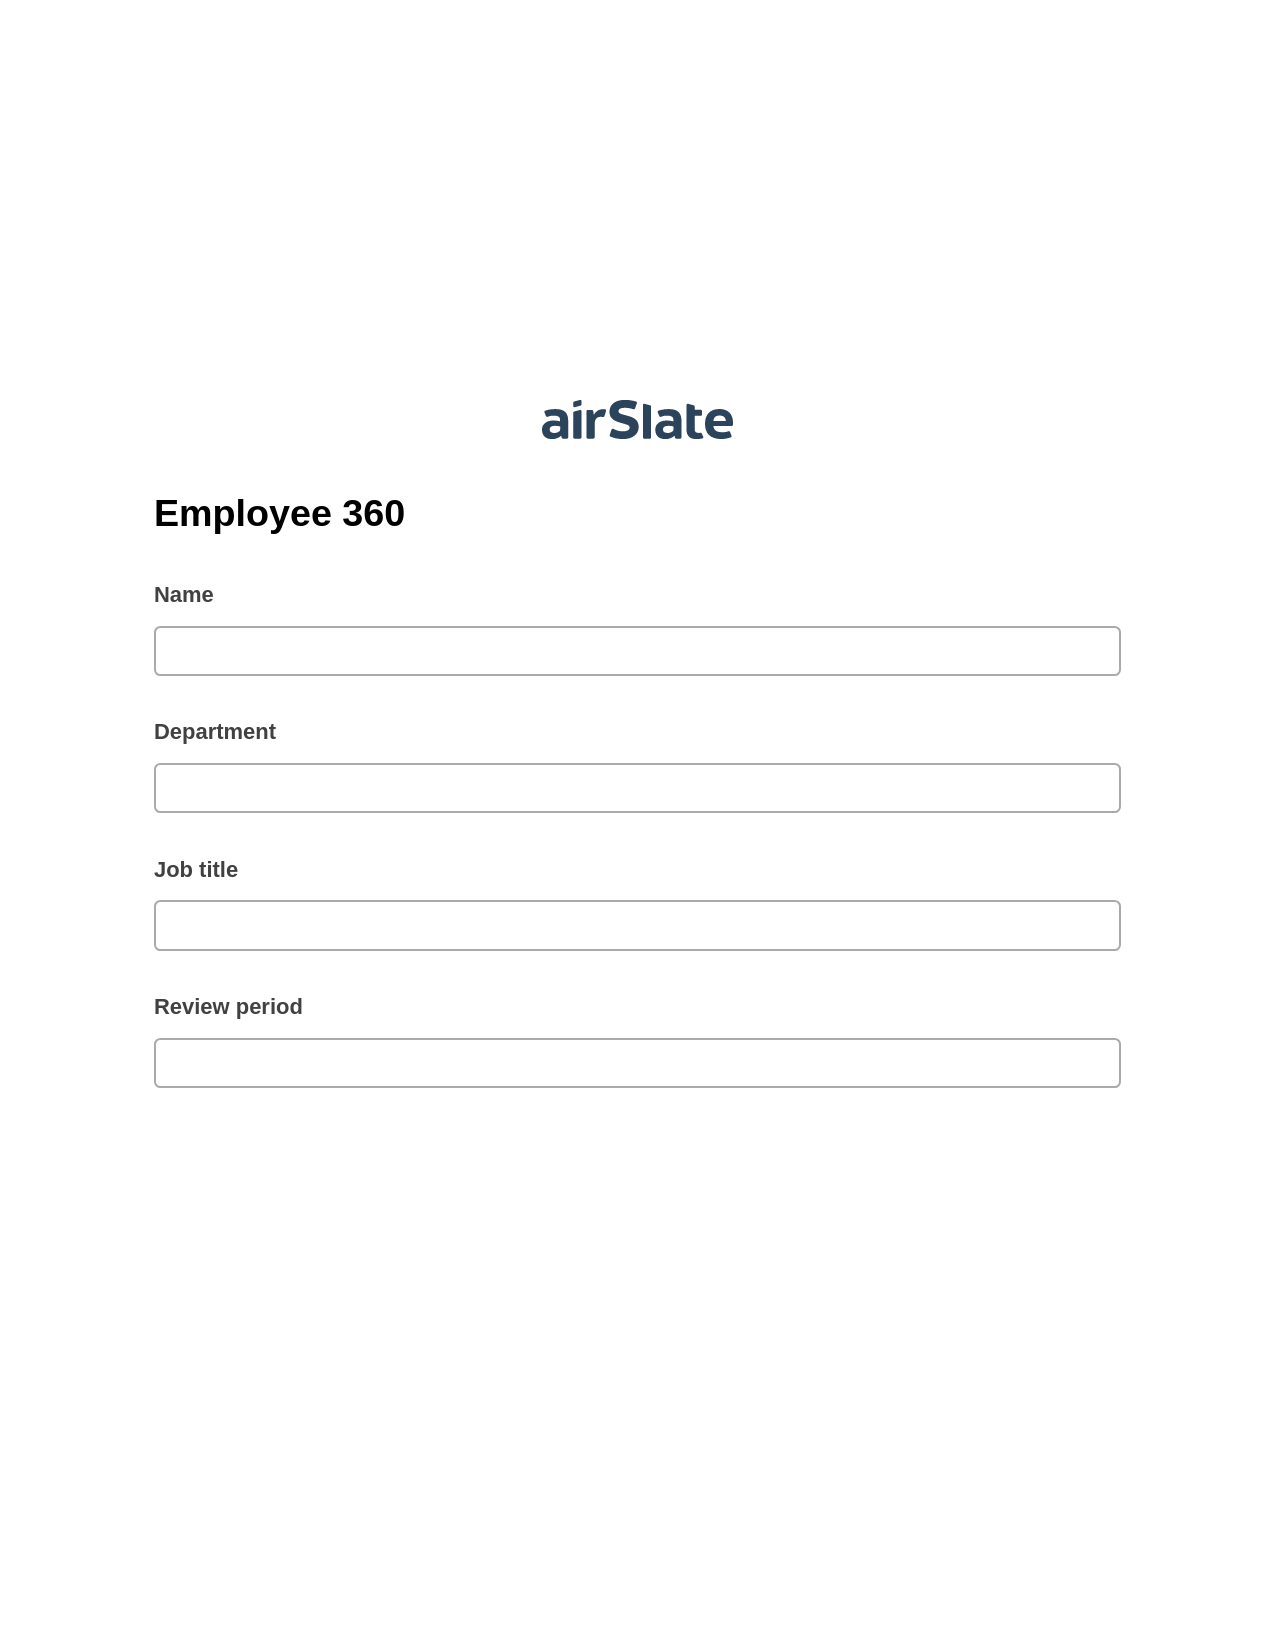 Multirole Employee 360 Prefill from NetSuite records, Lock the Slate Bot, Export to WebMerge Bot